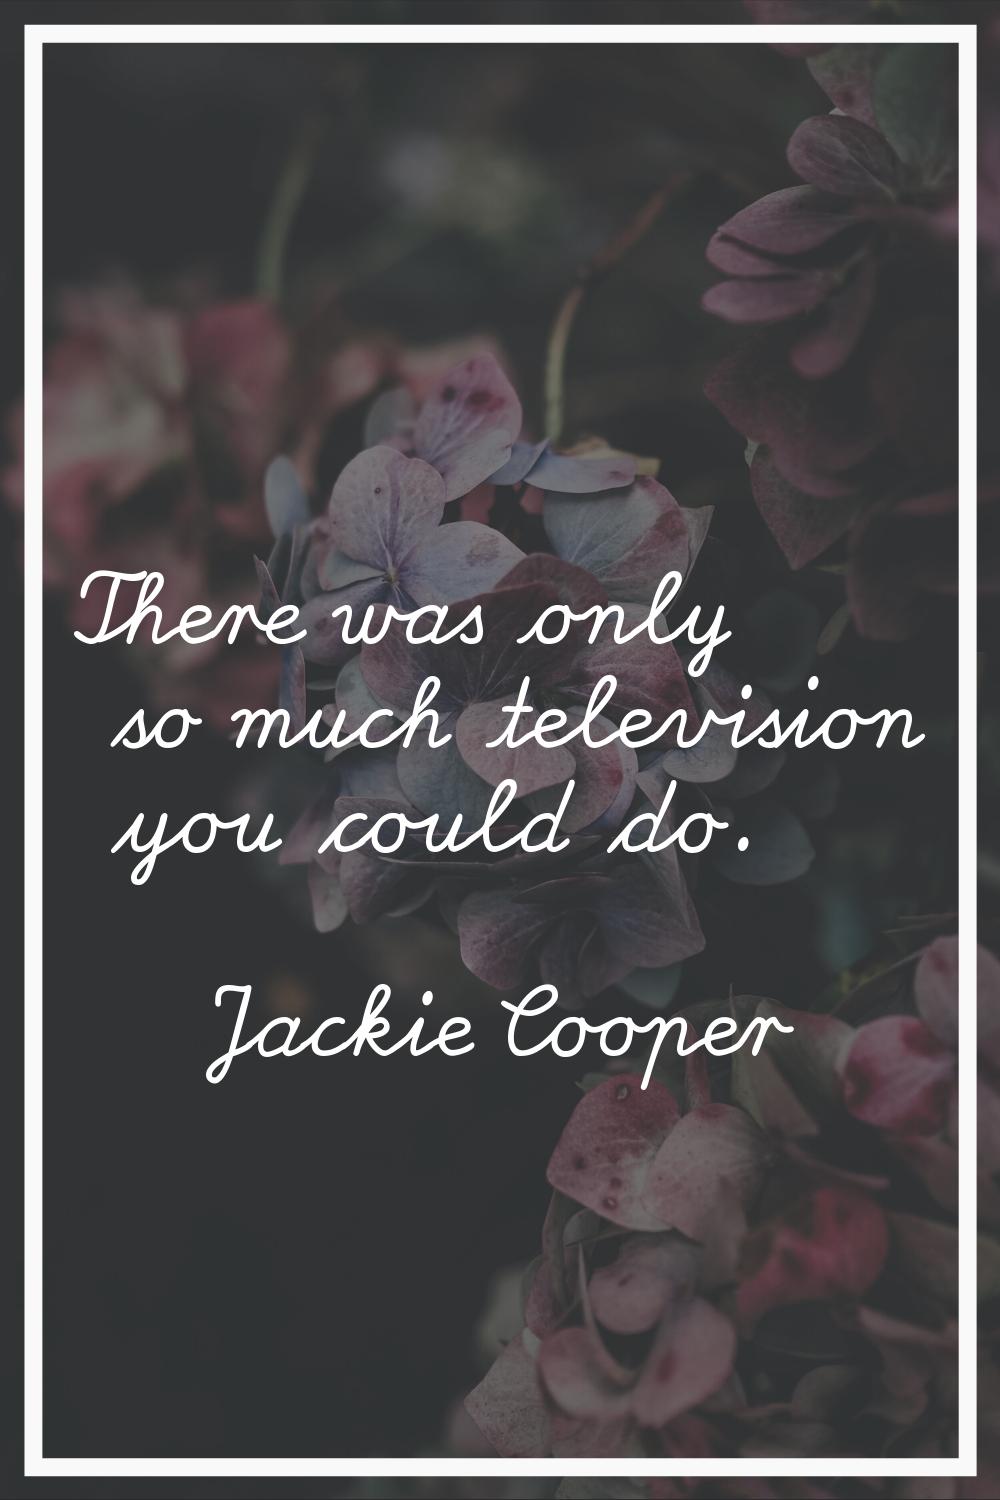 There was only so much television you could do.